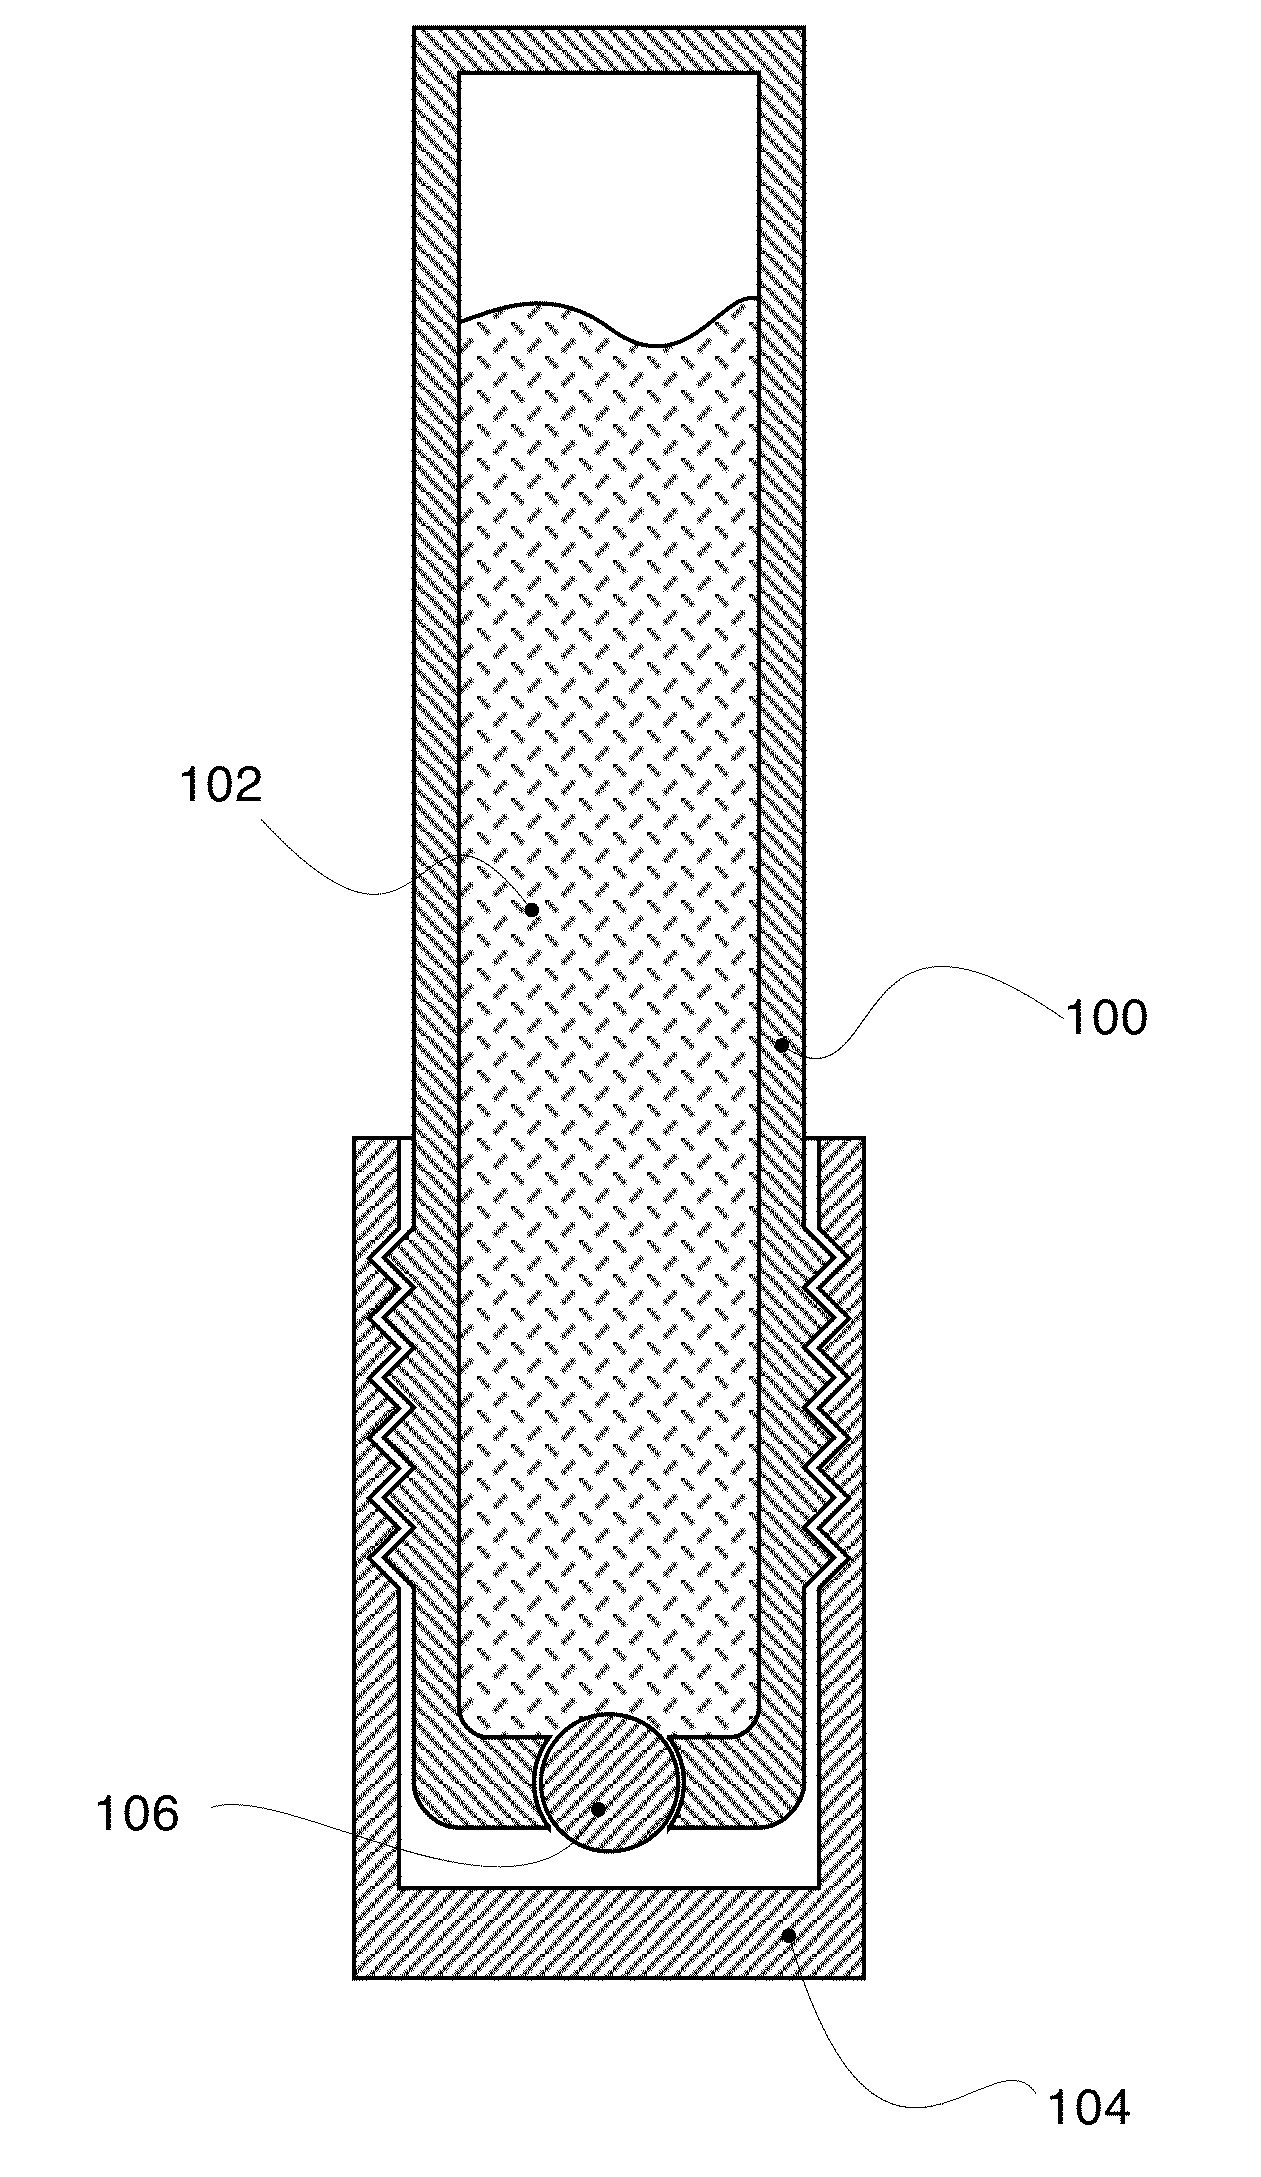 Method for the treatment and/or prevention of oral allergic symptions of the lips due to oral contact with a food allergen